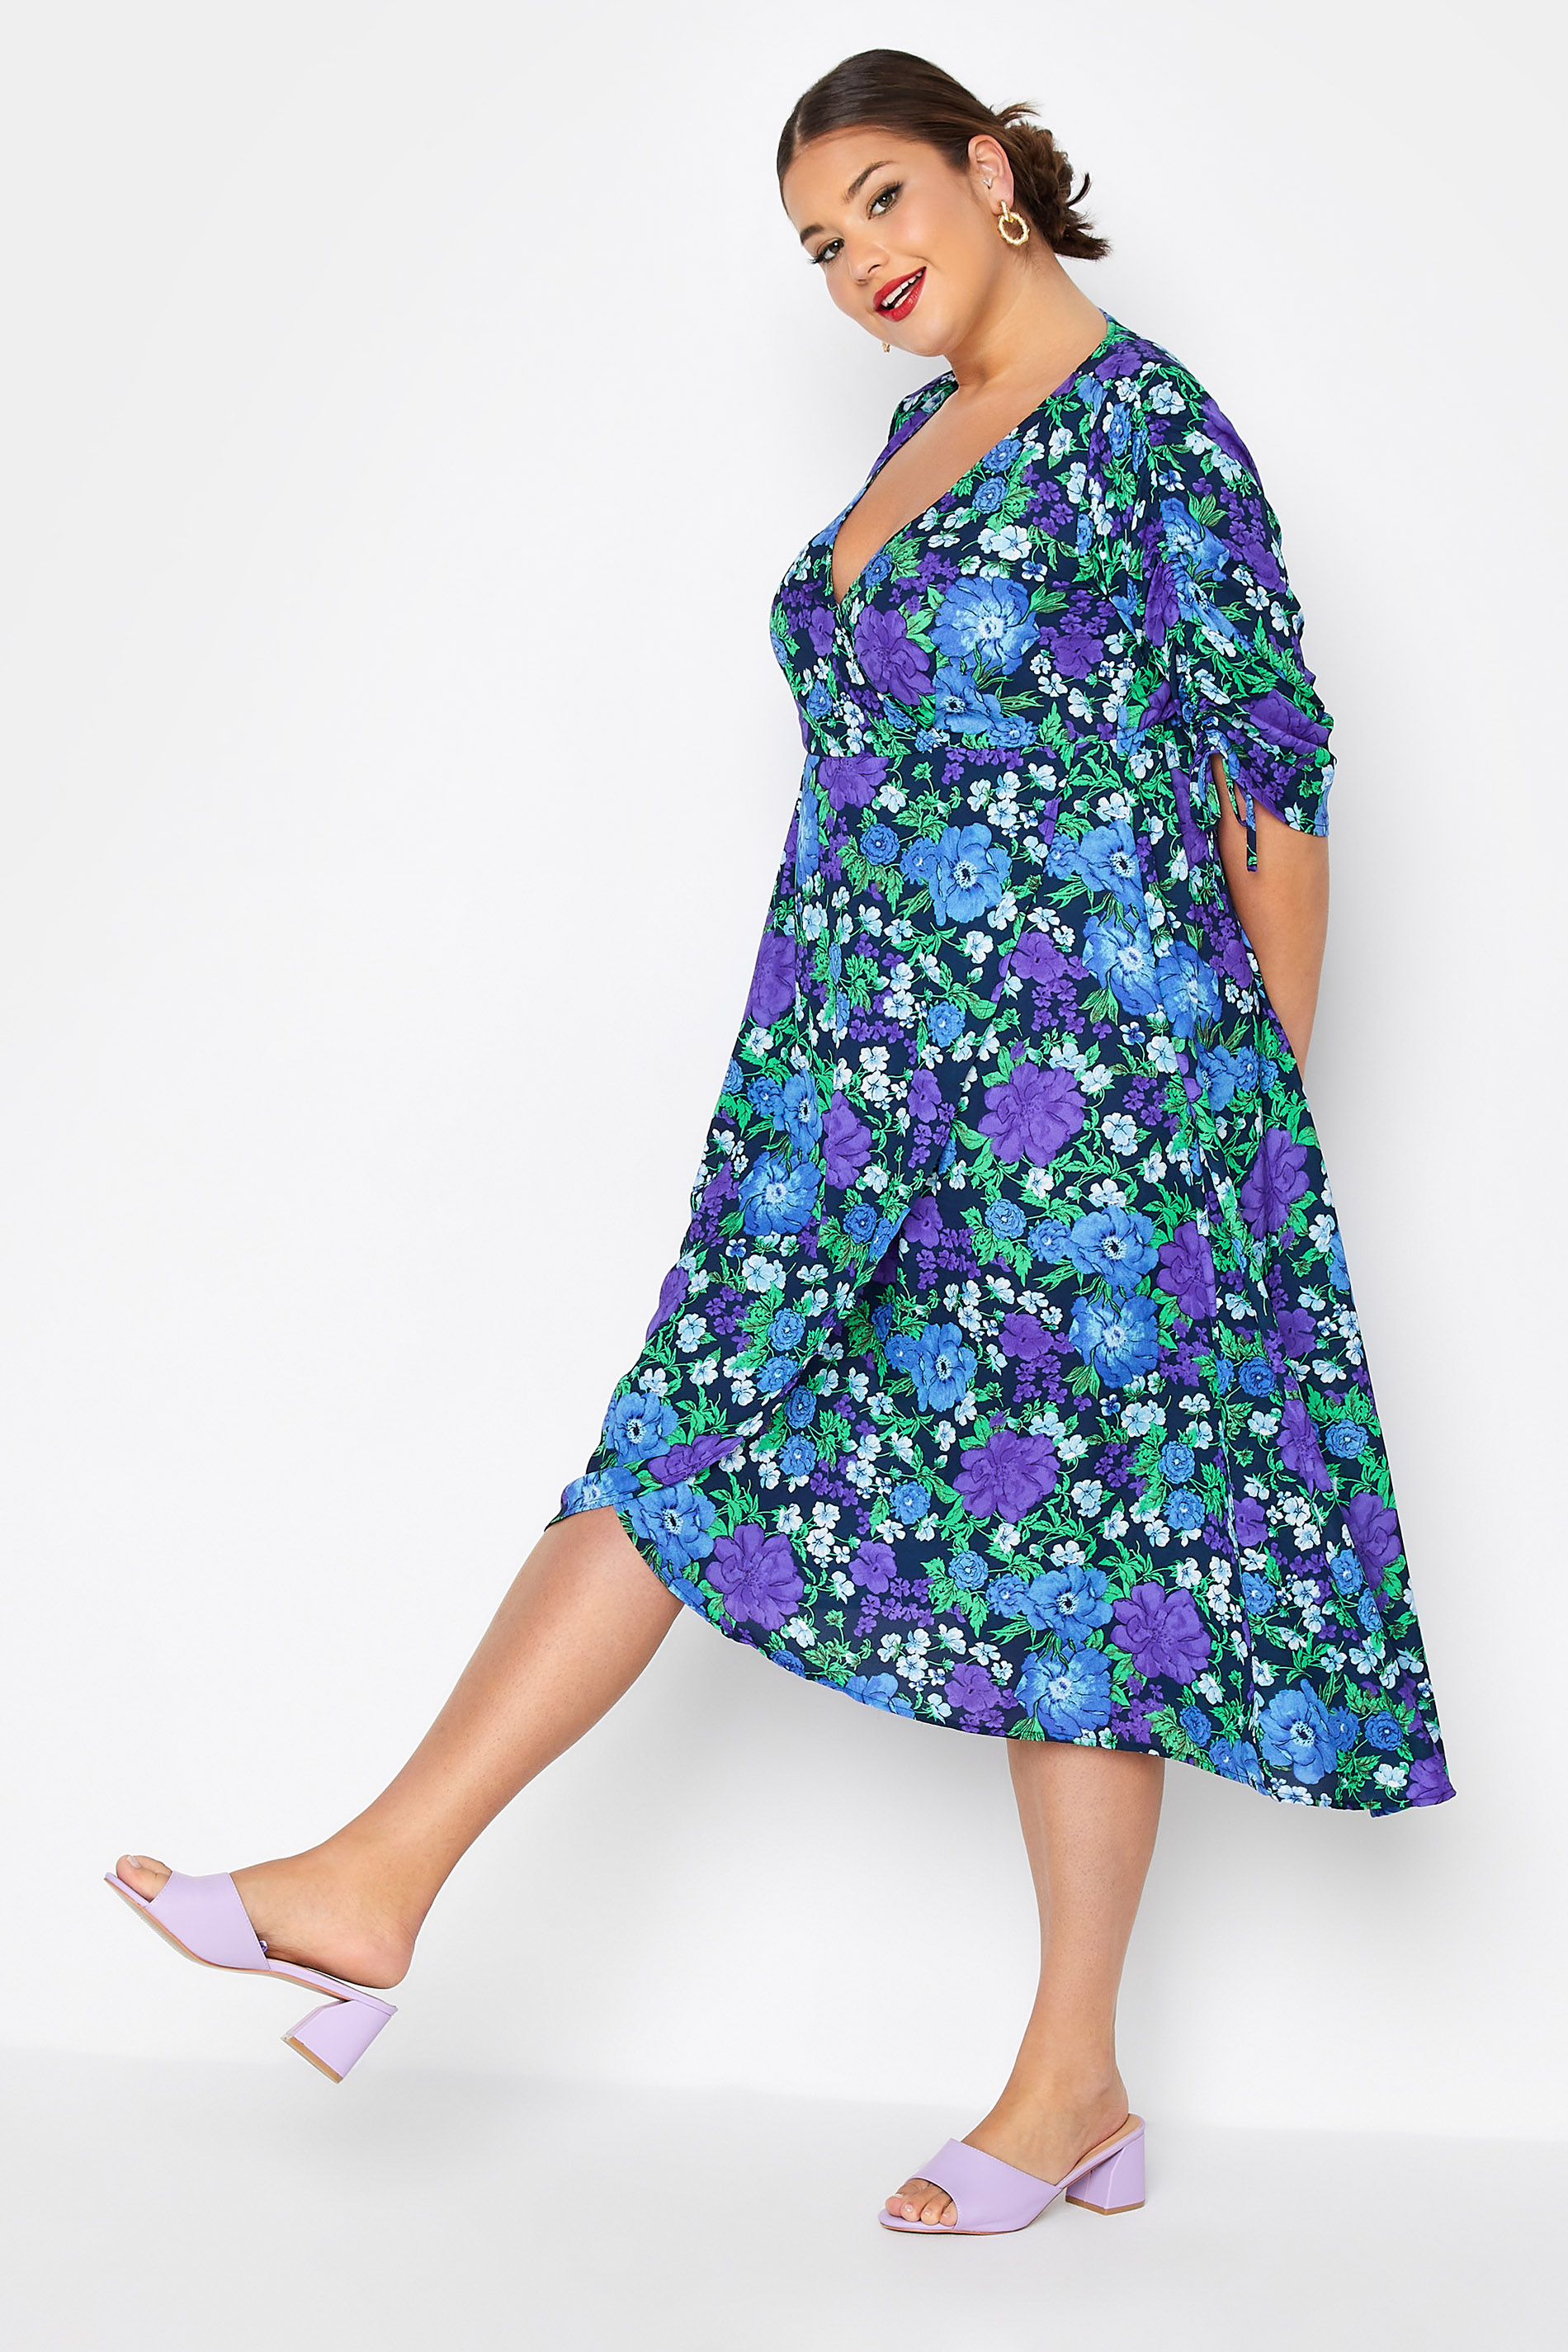 Robes Grande Taille Grande taille  Robes Portefeuilles | LIMITED COLLECTION - Robe Cache-Coeur Floral Bleu & Violet - OL40326